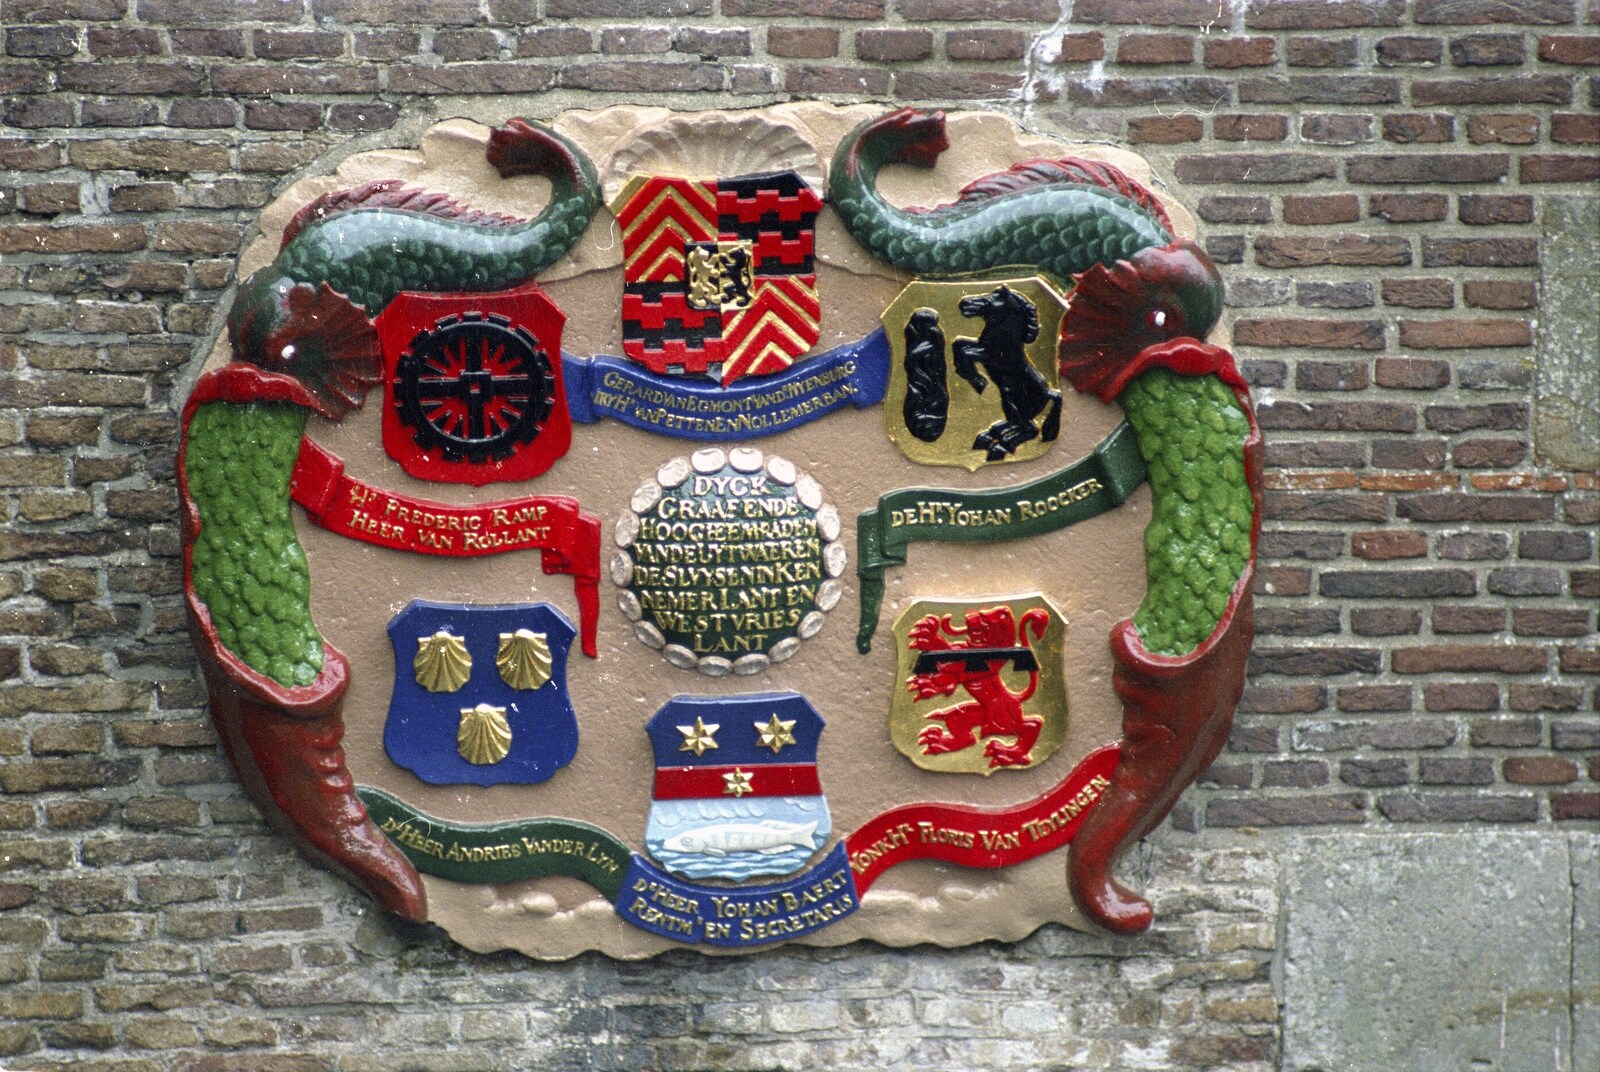 Out and About in Amsterdam, Hoorne, Vollendam and Edam, The Netherlands - 26th March 1992: A brightly coloured plaque on a wall